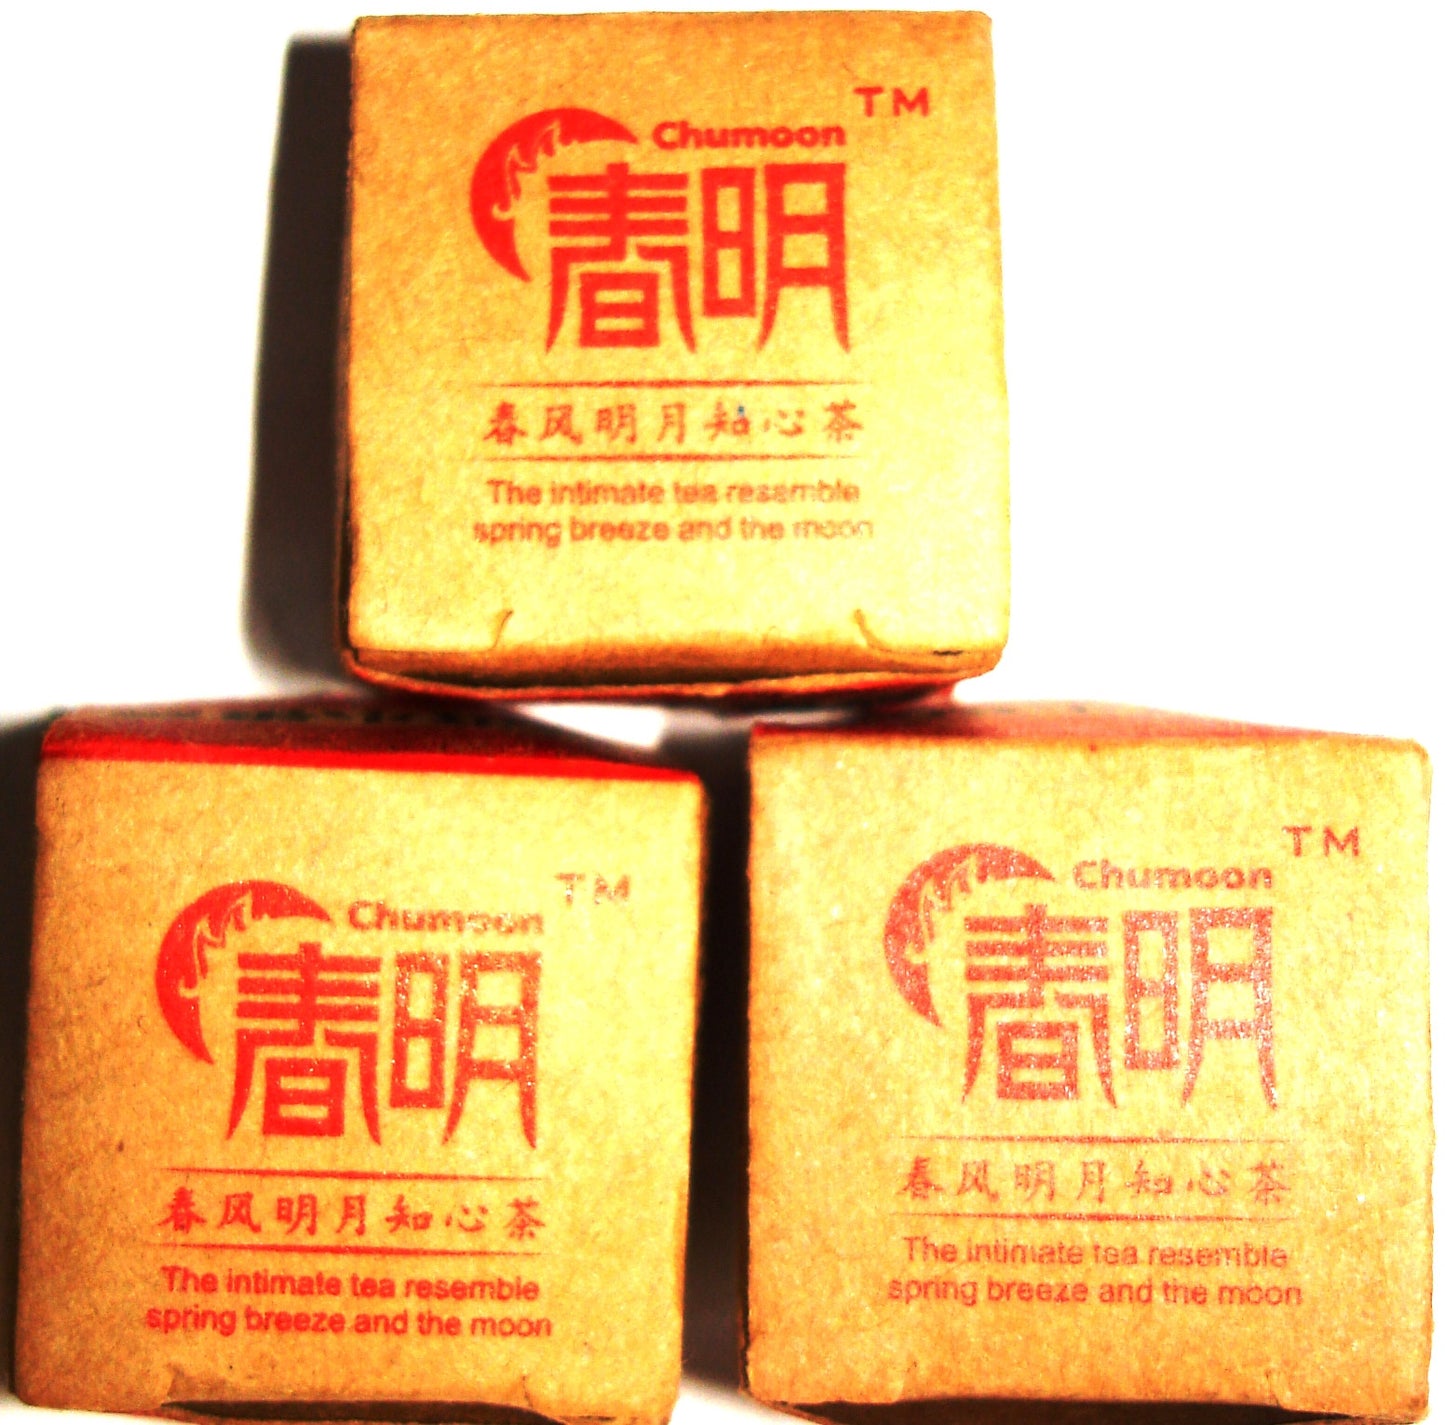 Three bricks of Chun Moon Sheng Pu-ehr tea in gold packaging with red lettering